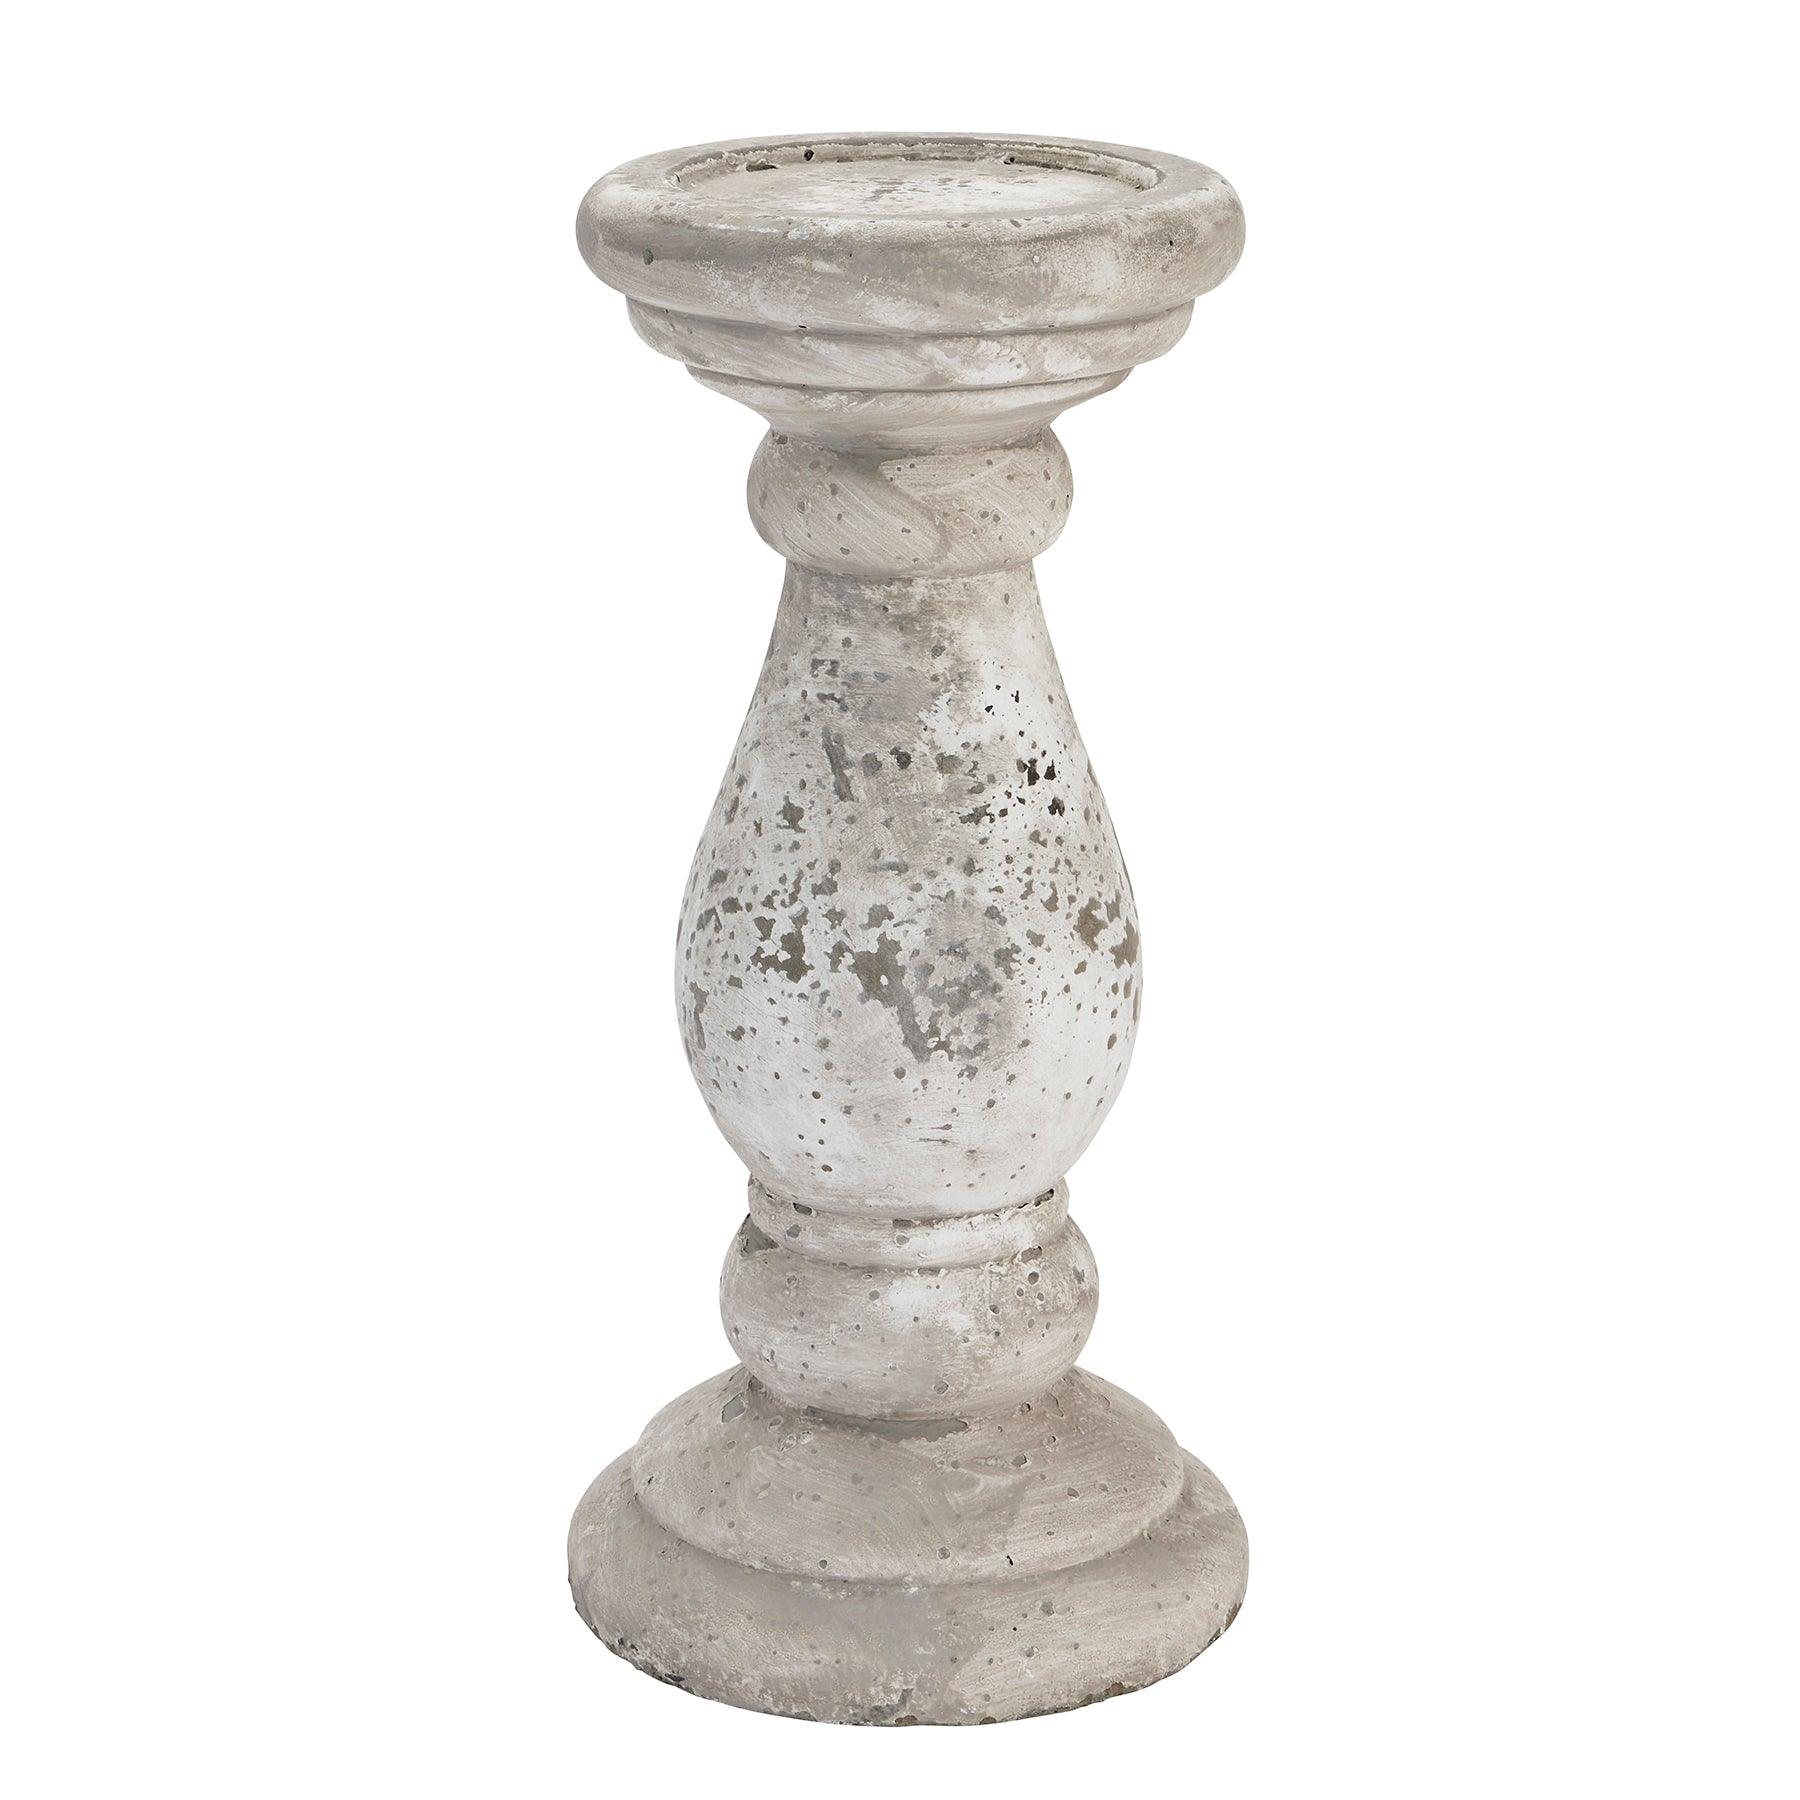 Large Stone Ceramic Candle Holder - £54.95 - Gifts & Accessories > Candle Holders > Ornaments 